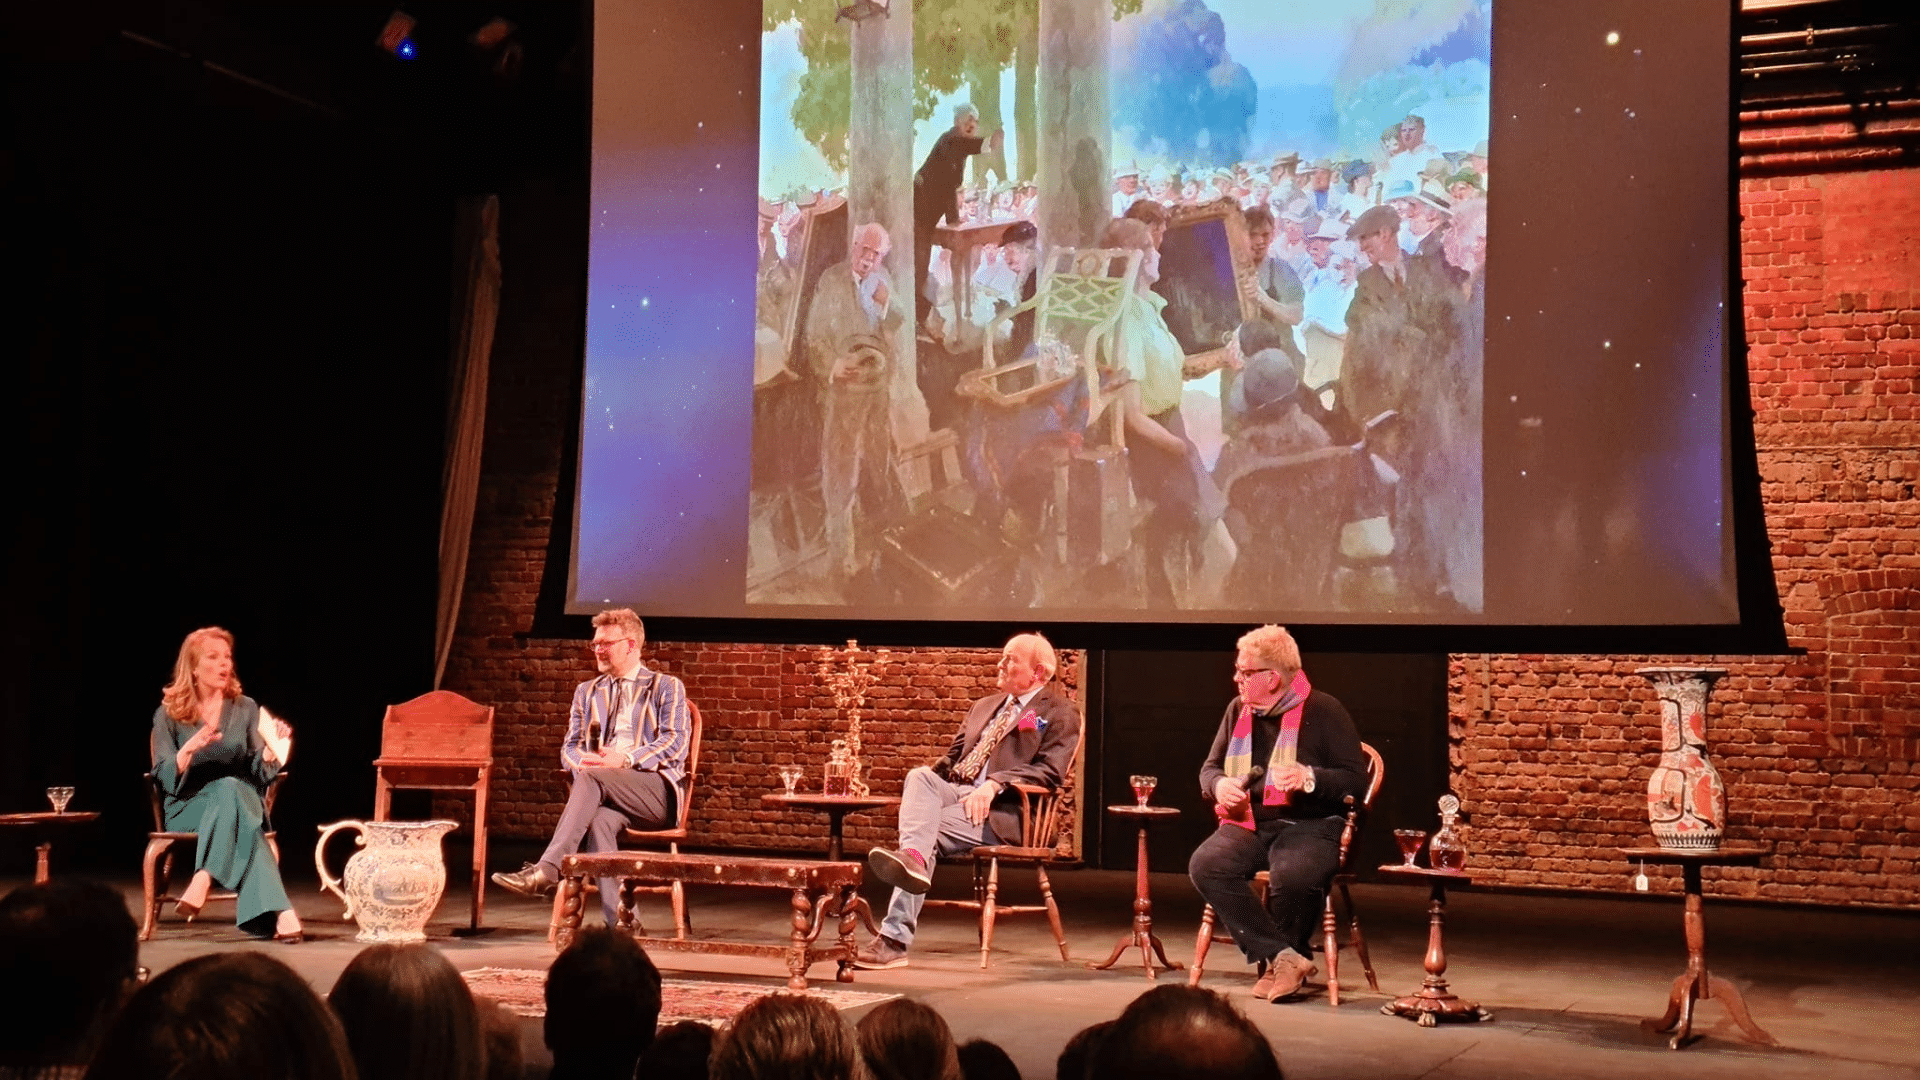 Foreground: silhouette of audiences' heads. Midground: Charlie Ross, Christina Trevanion, Charles Hanson and Phil Serrell sitting on chairs on a stage surrounded by a selection of antique items. Background, a large projection screen showing a photograph of a painting.